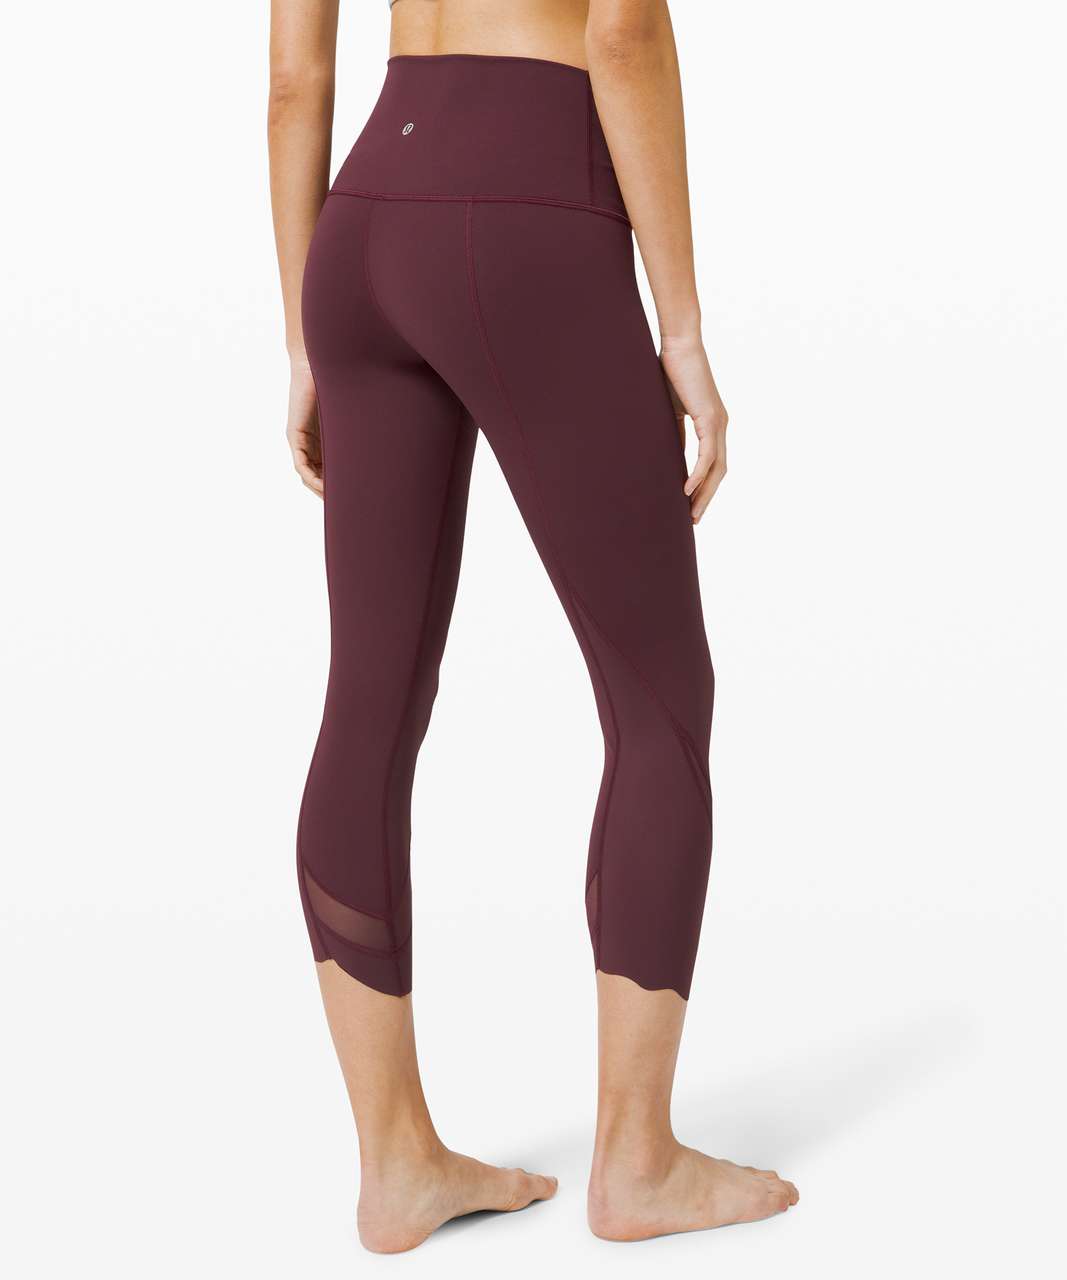 Lululemon Wunder Under Crop High-Rise *Roll Down Scallop Full-On Luxtreme 23" - Cassis